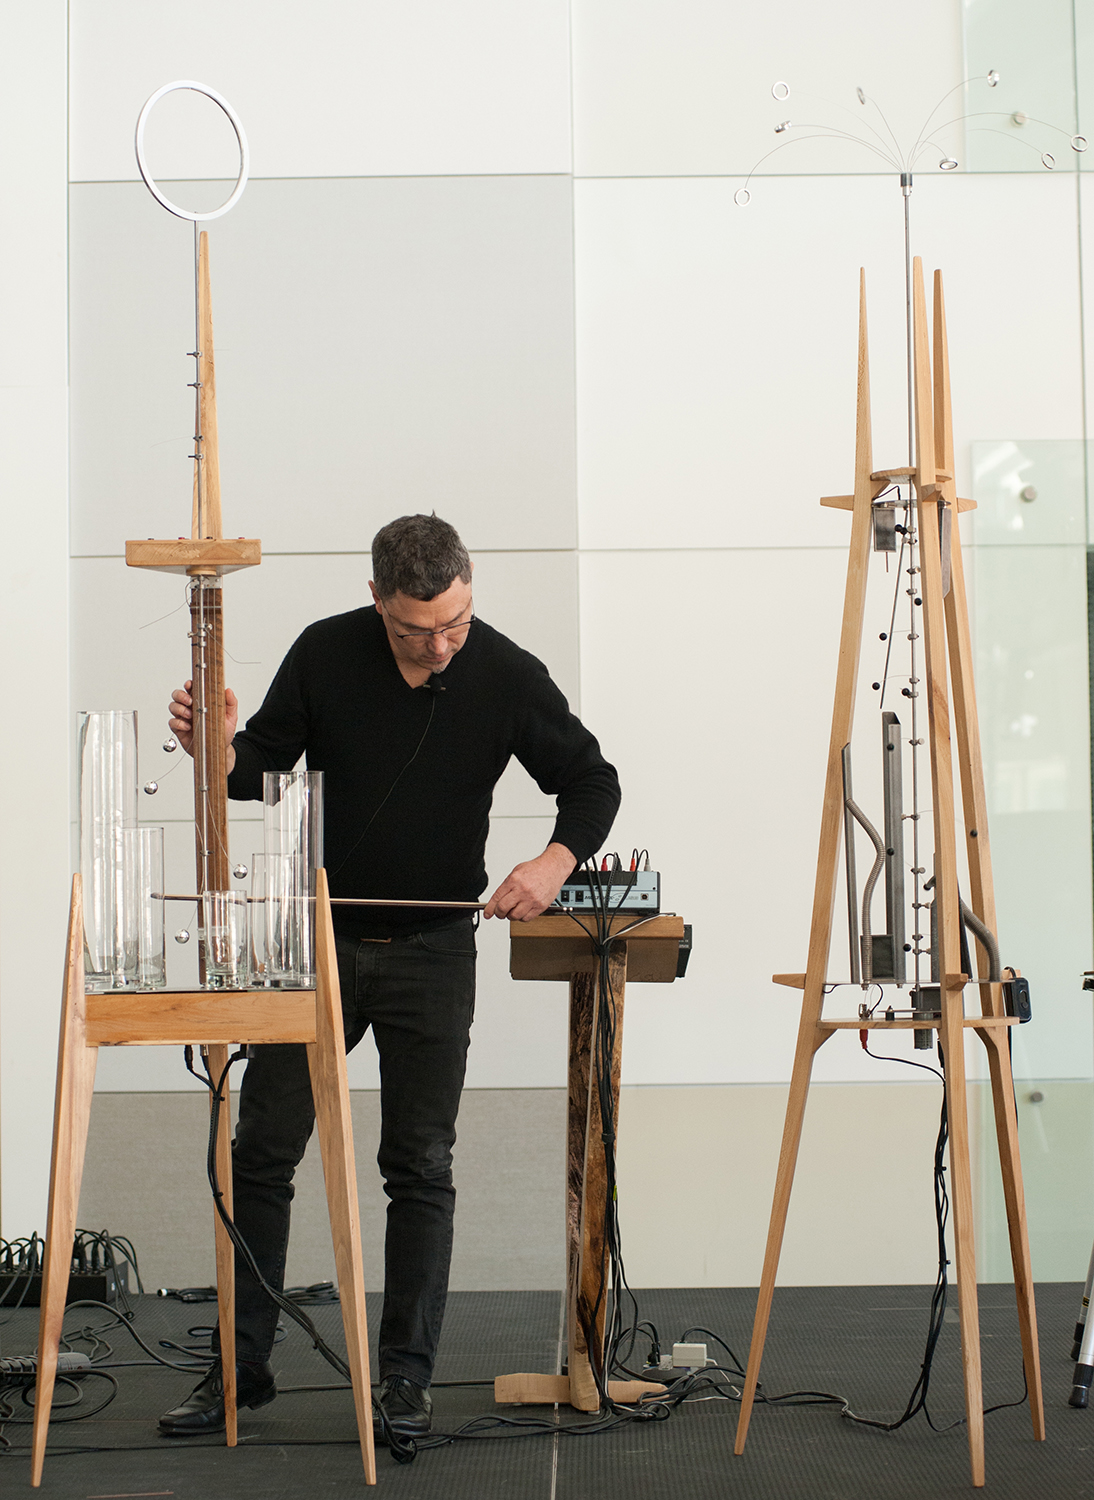 Man using a rod to make music on two easel-like wood towers that hold small metallic pieces and glass cylinders, and are connected by wires to an amplifier